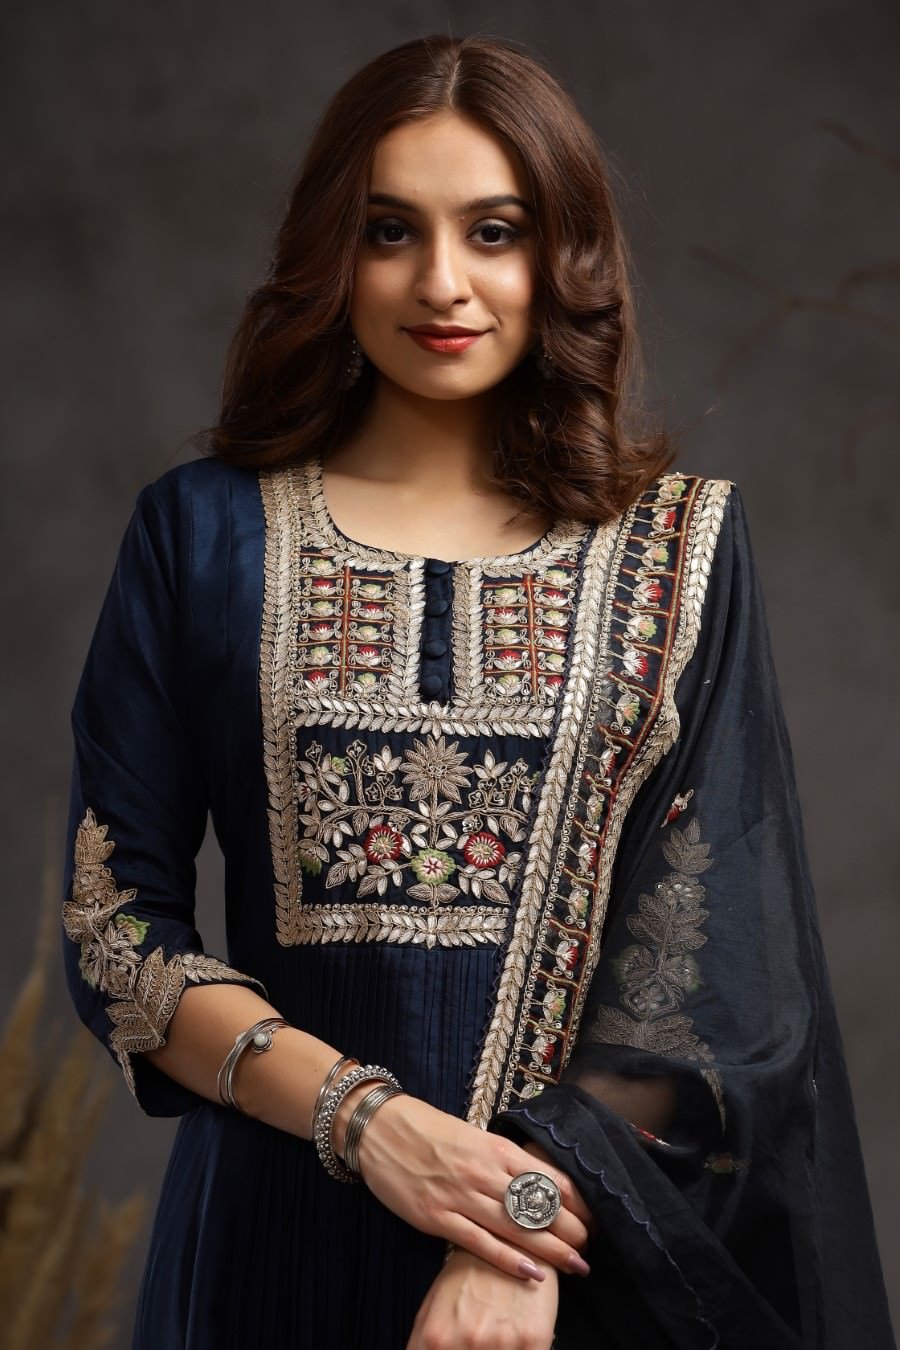 Navy blue Modal Silk Long Enkle Length Stylish Dress And Dupatta With Embroidery